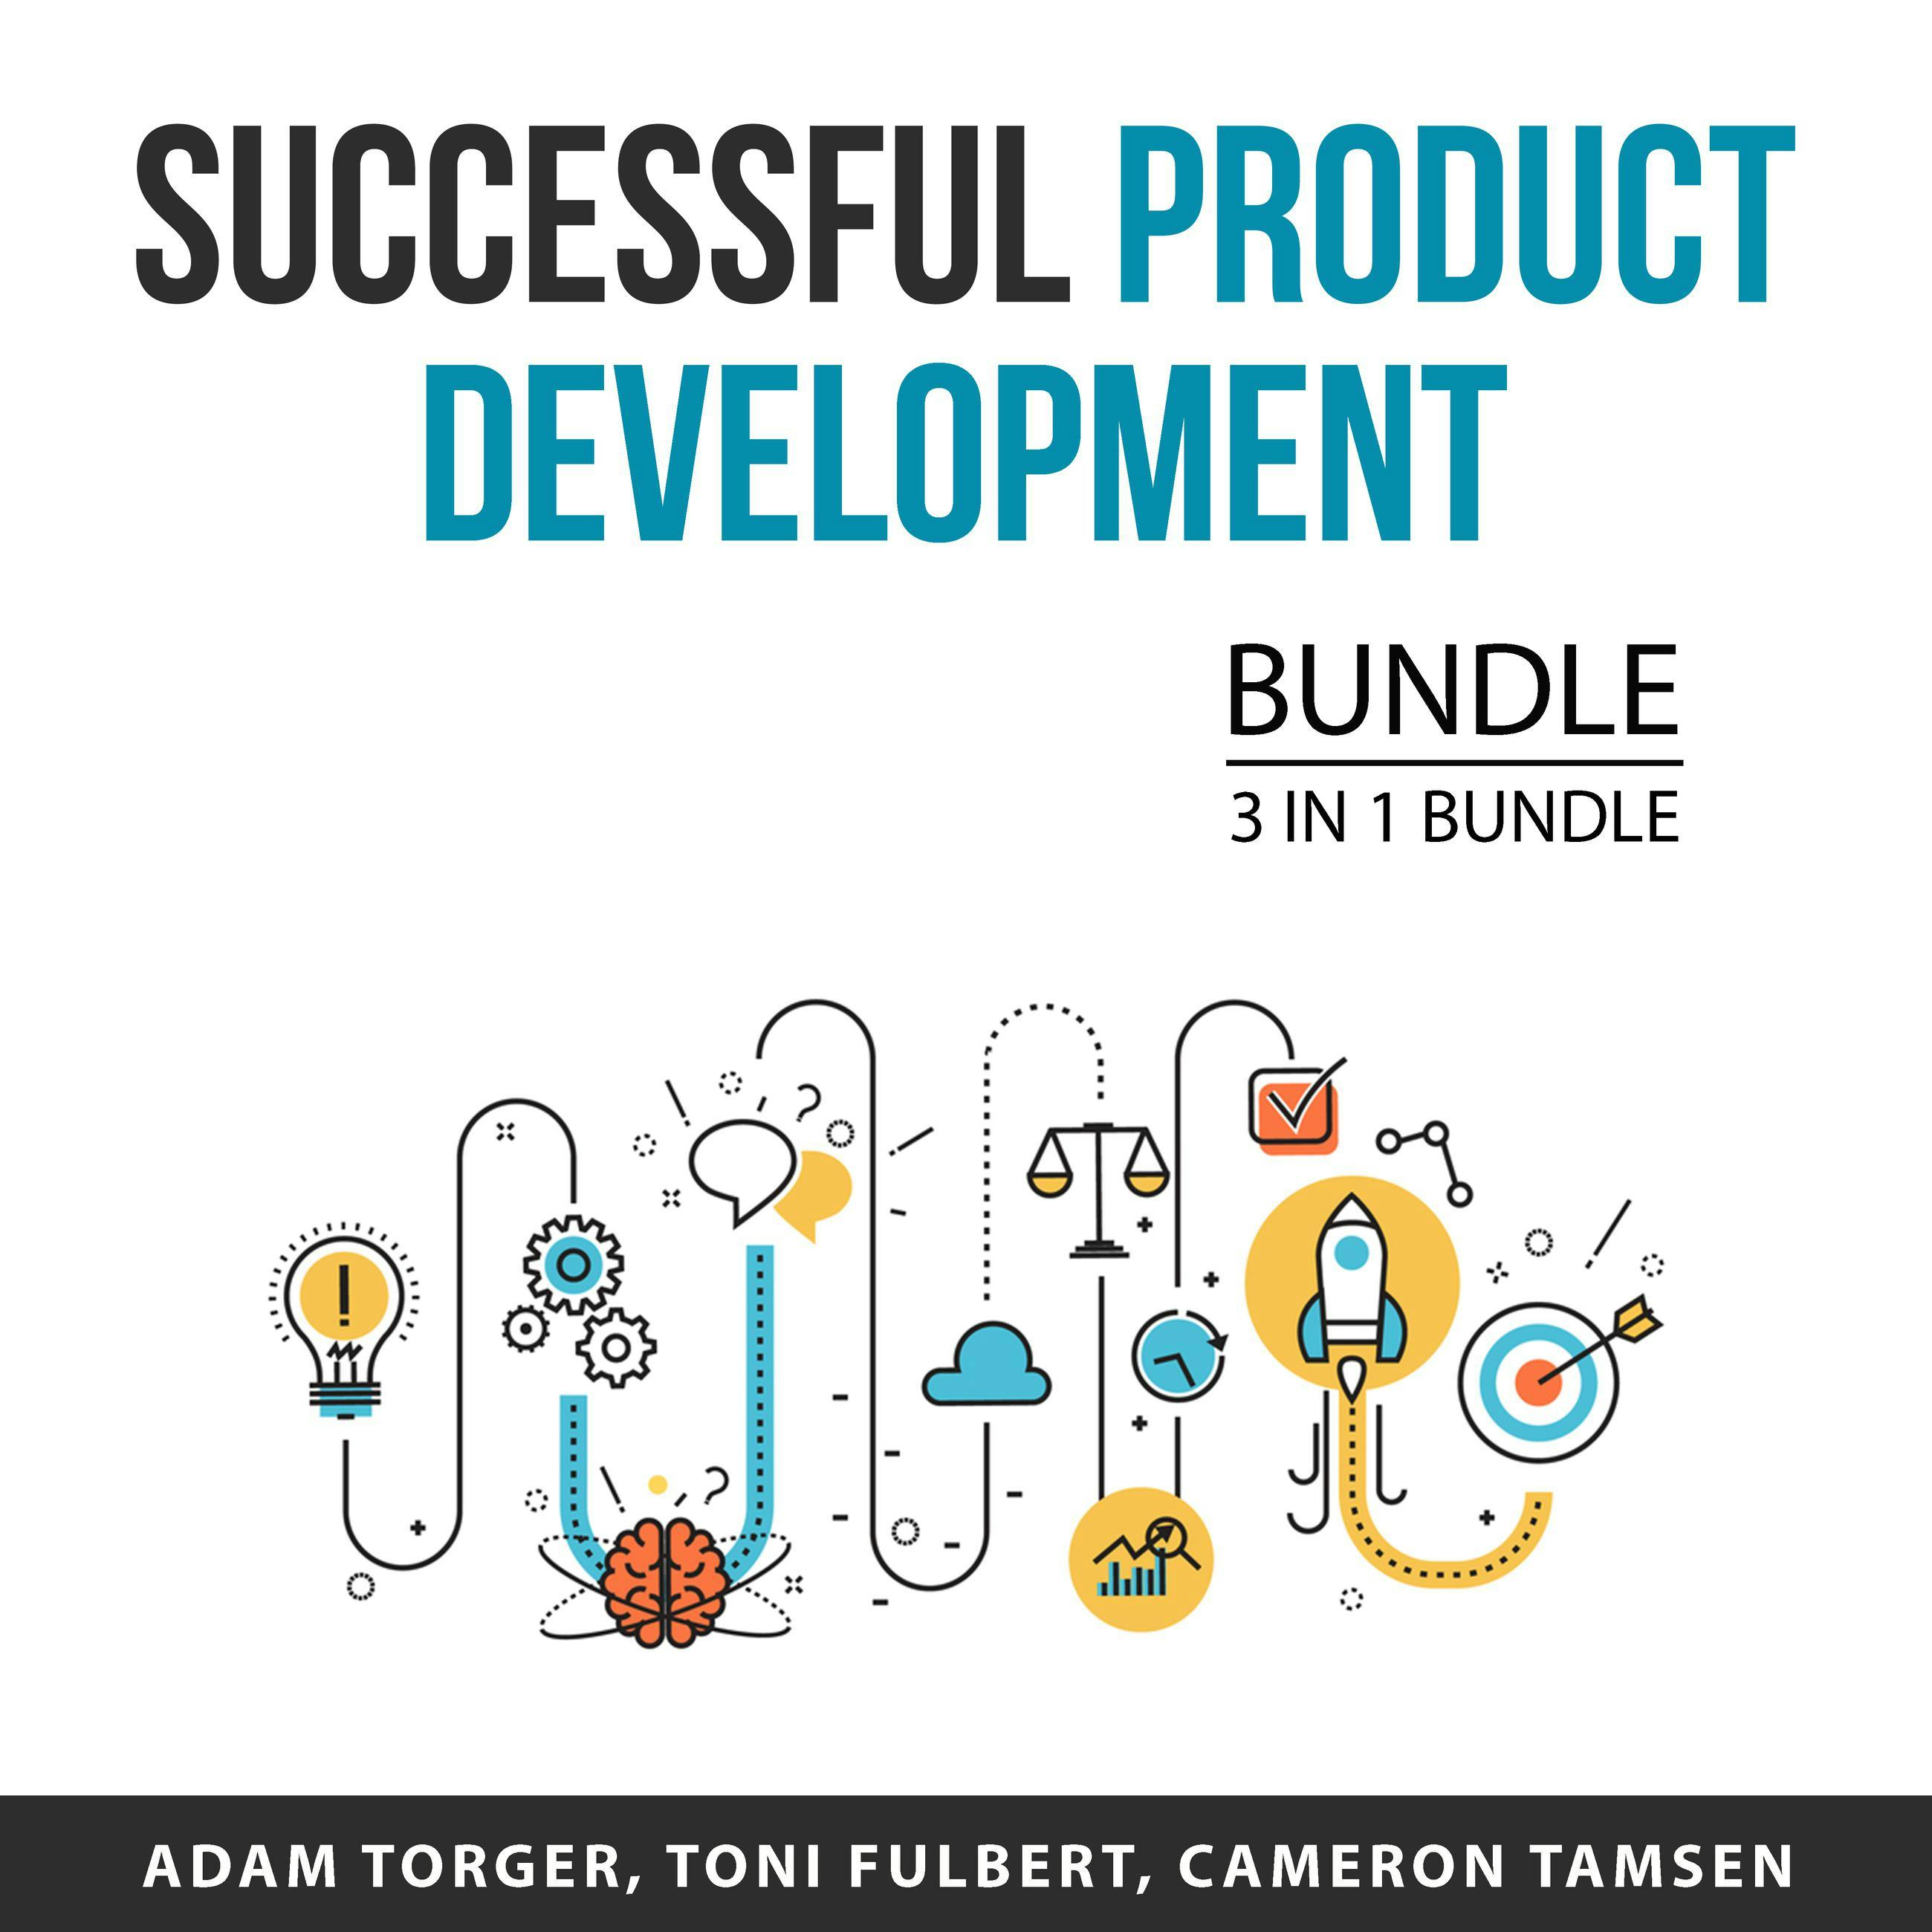 Successful Product Development Bundle, 3 in 1 Bundle: Product Creation Blueprint, Product Launch Mastery, and Digital Product Development - Adam Torger, Cameron Tamsen, Toni Fulbert